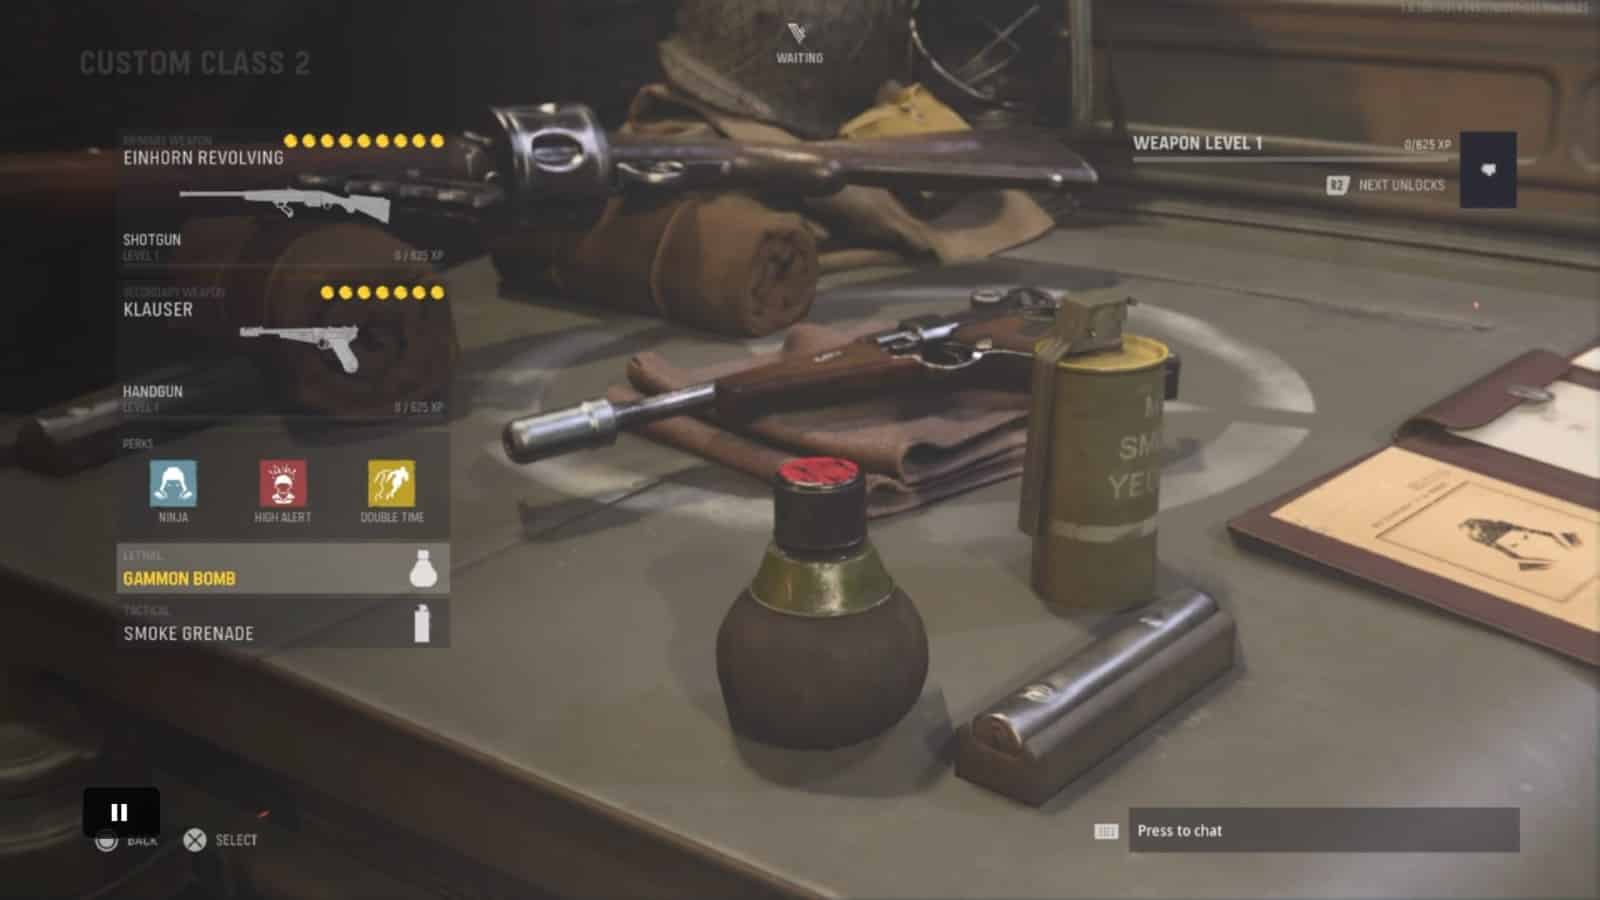 Picture of the class setup for the Einhorn Revolving shotgun in Call of Duty vanguard - a visual aid to the class explainer below. 